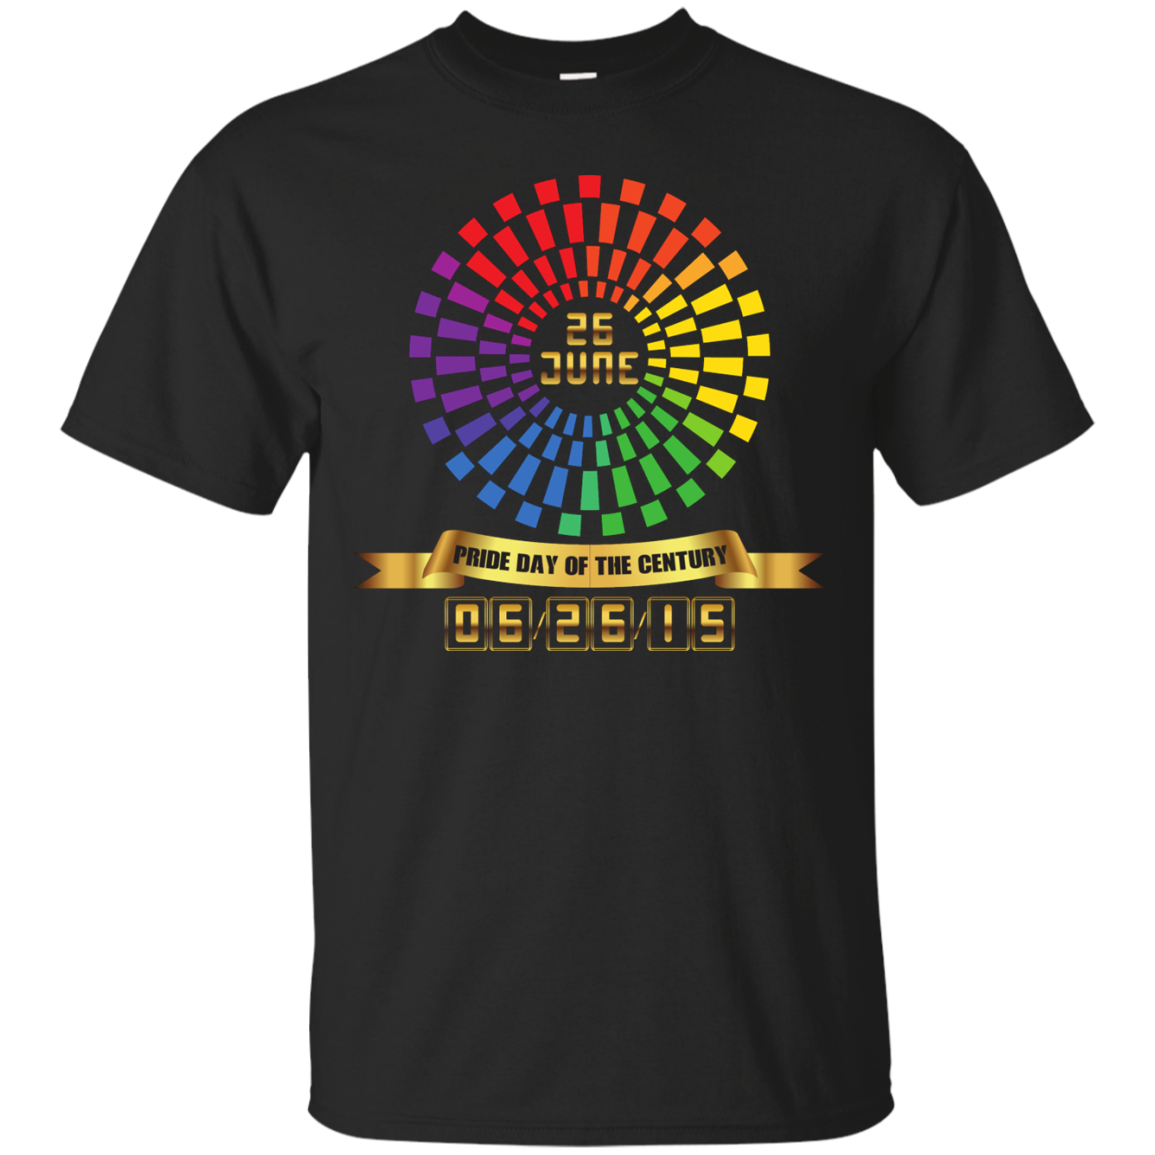 The "Pride Day Of The Century" Shirt